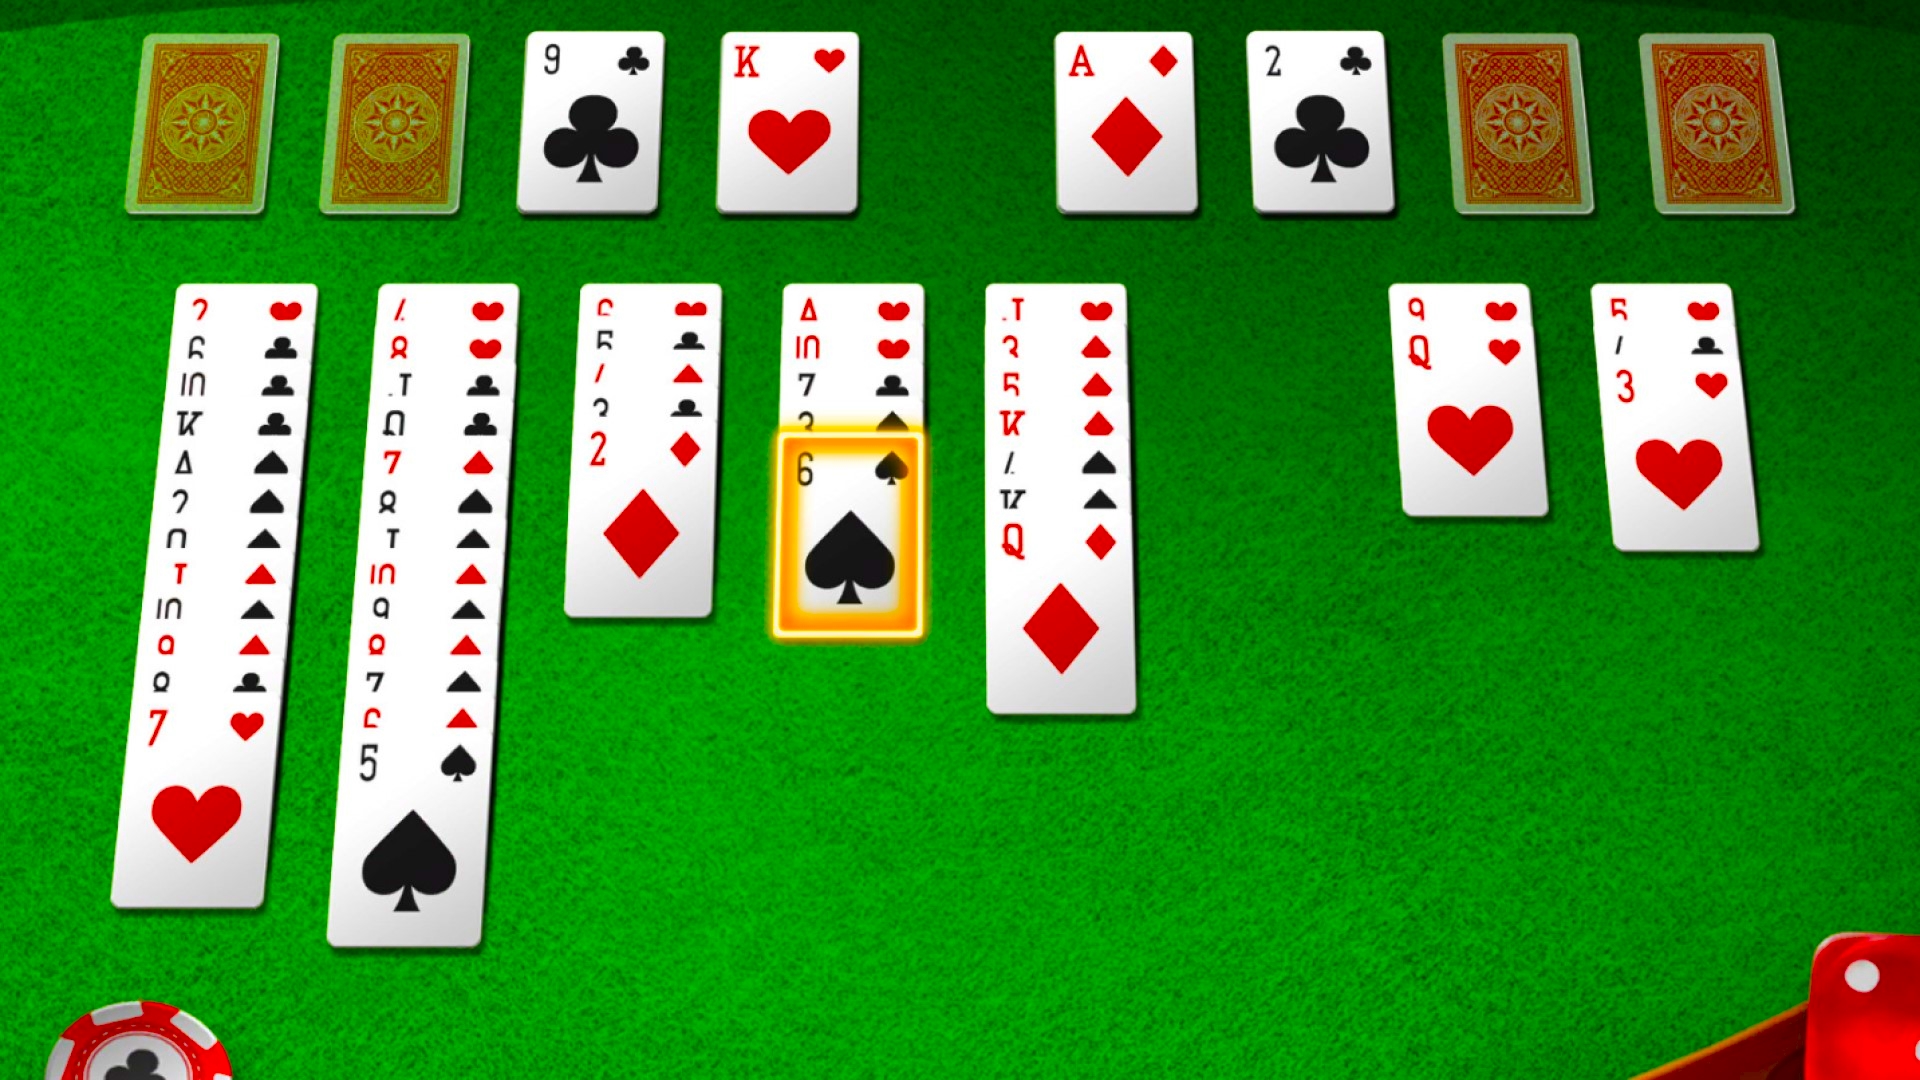 
How to play solitaire
